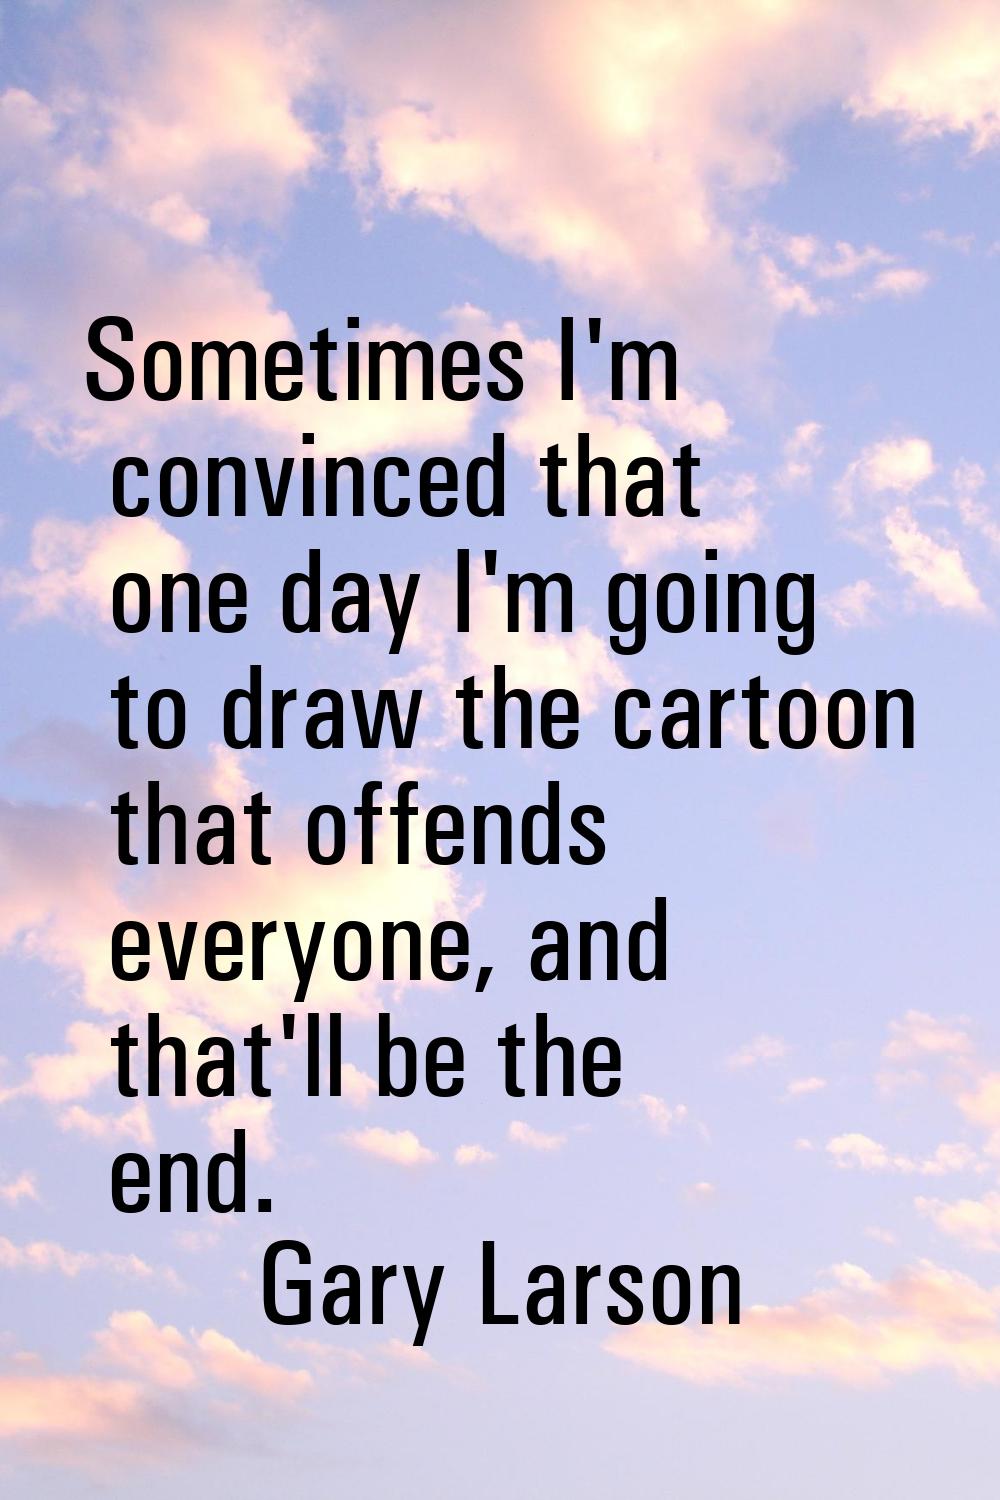 Sometimes I'm convinced that one day I'm going to draw the cartoon that offends everyone, and that'